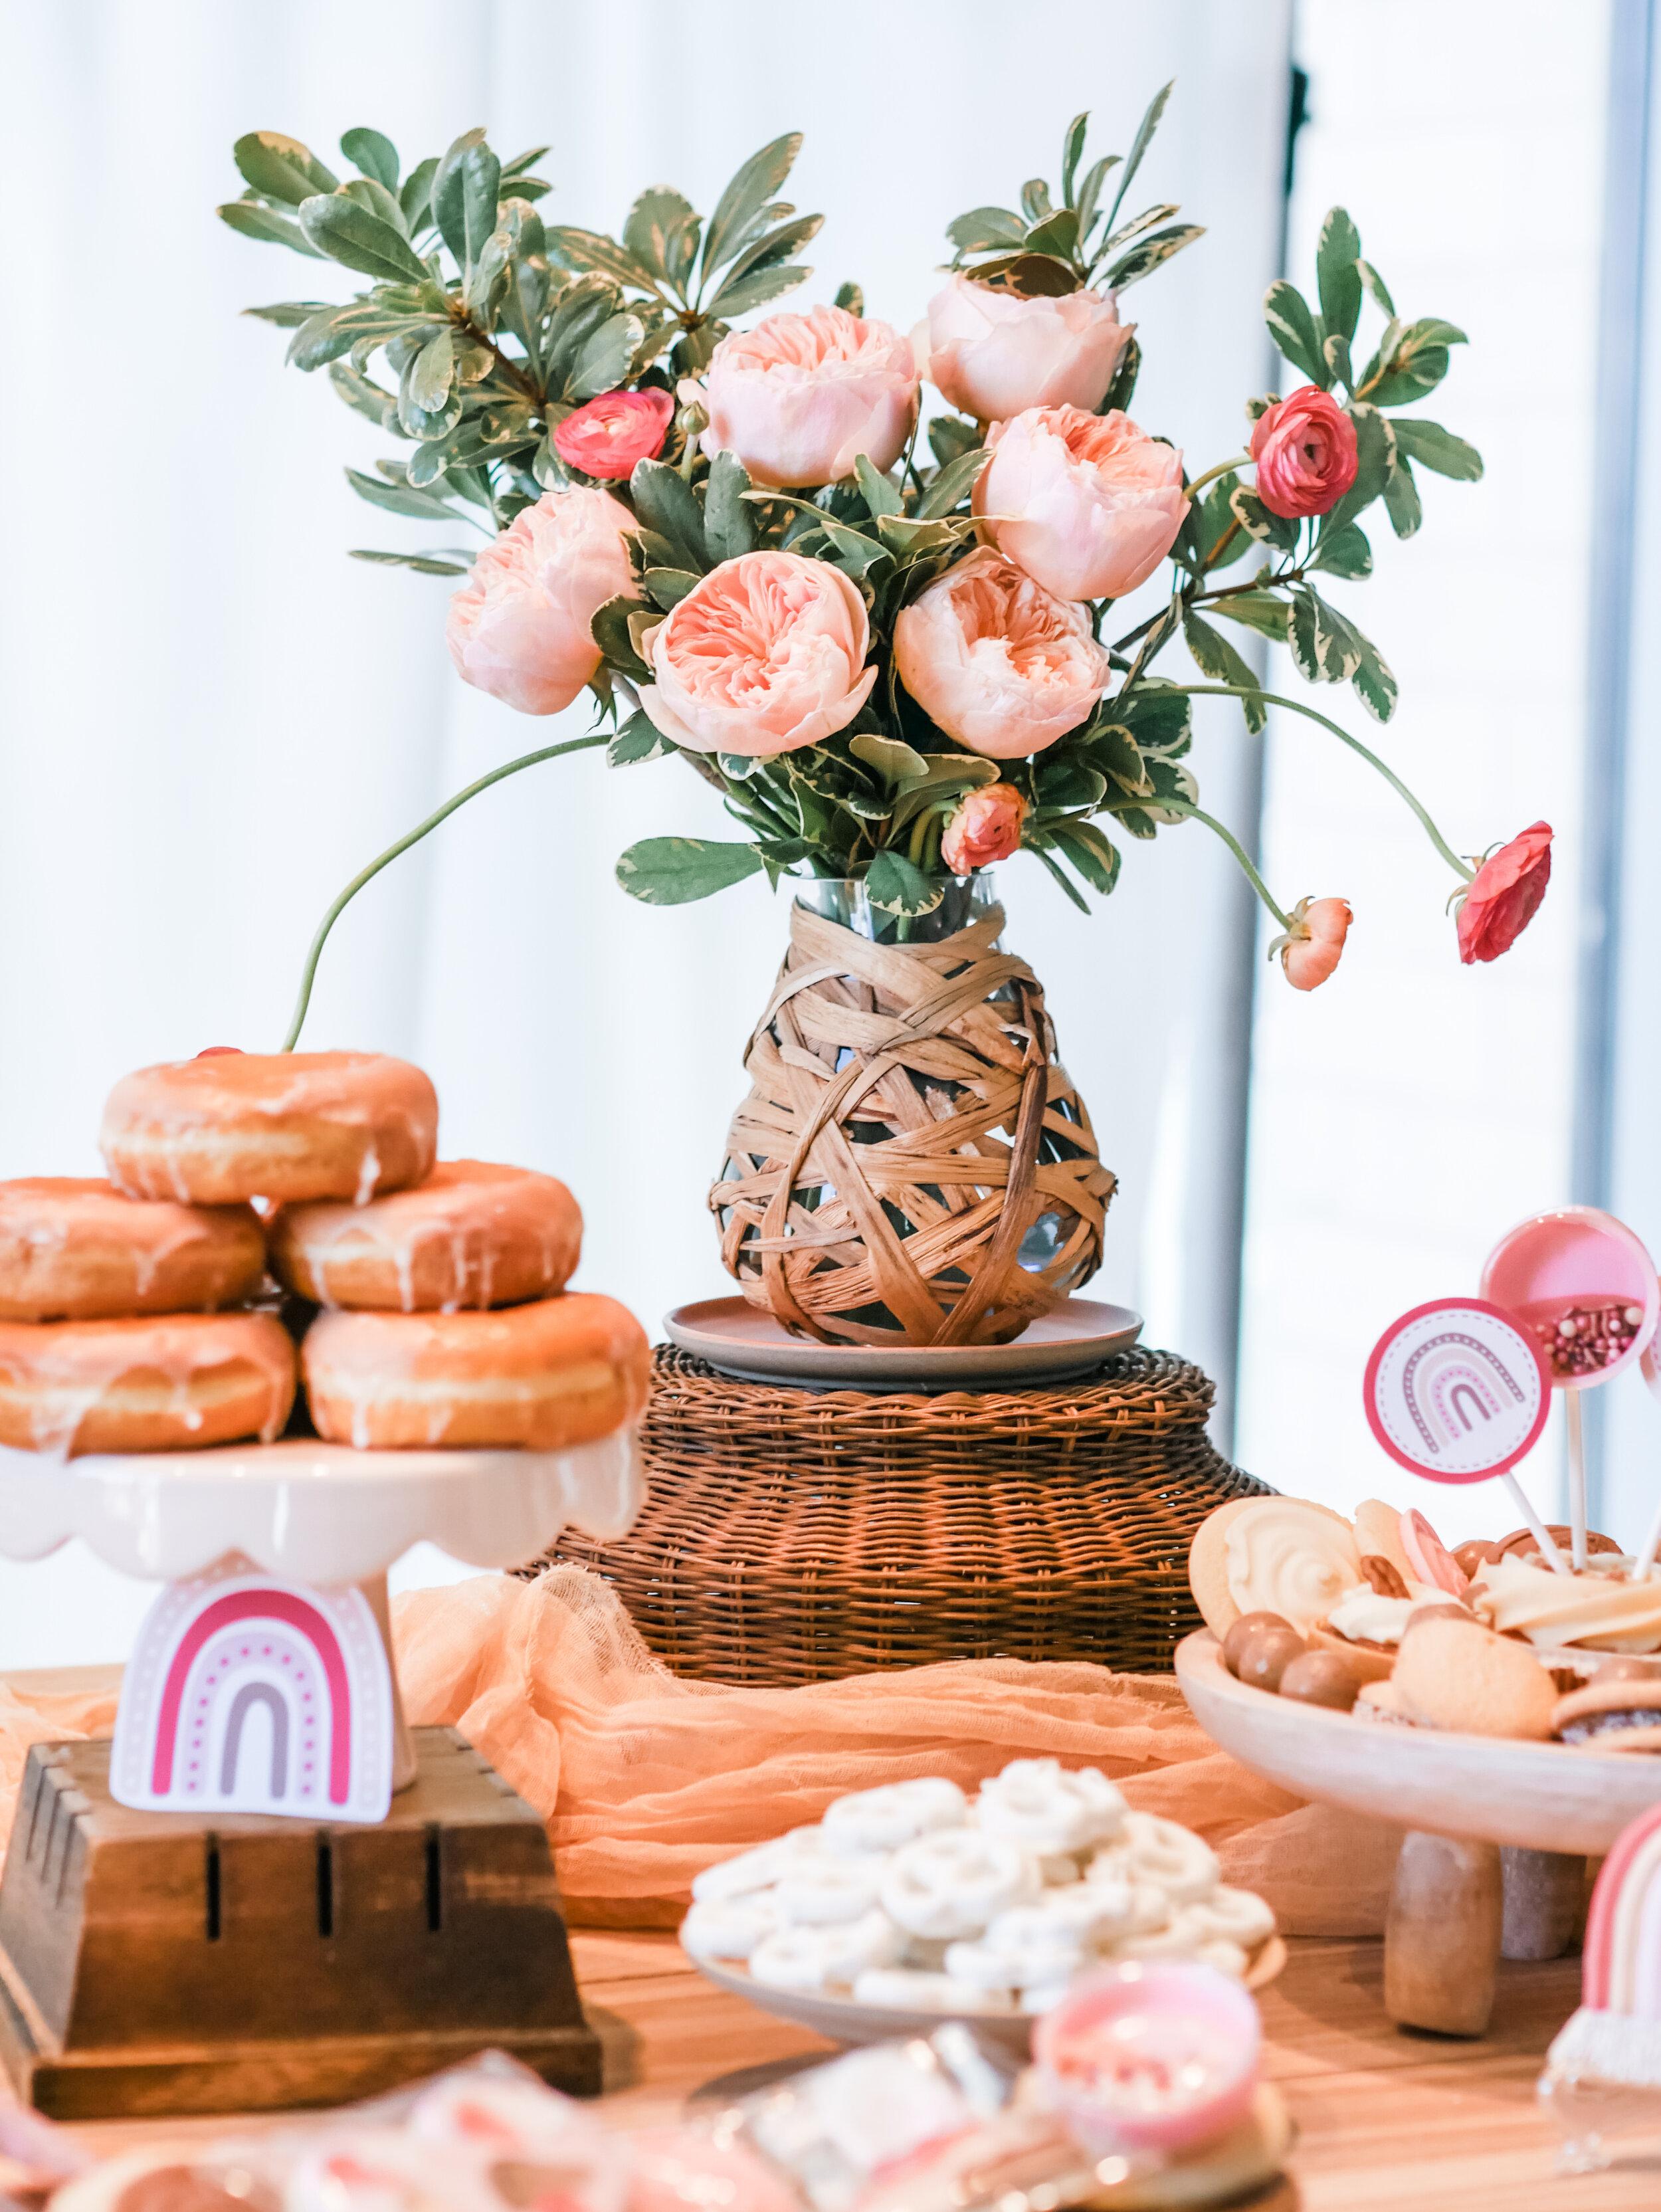 Muted Rainbow Dessert Table Ideas - great for a first birthday party or shower! Get details and tons more party inspiration now at minteventdesign.com.